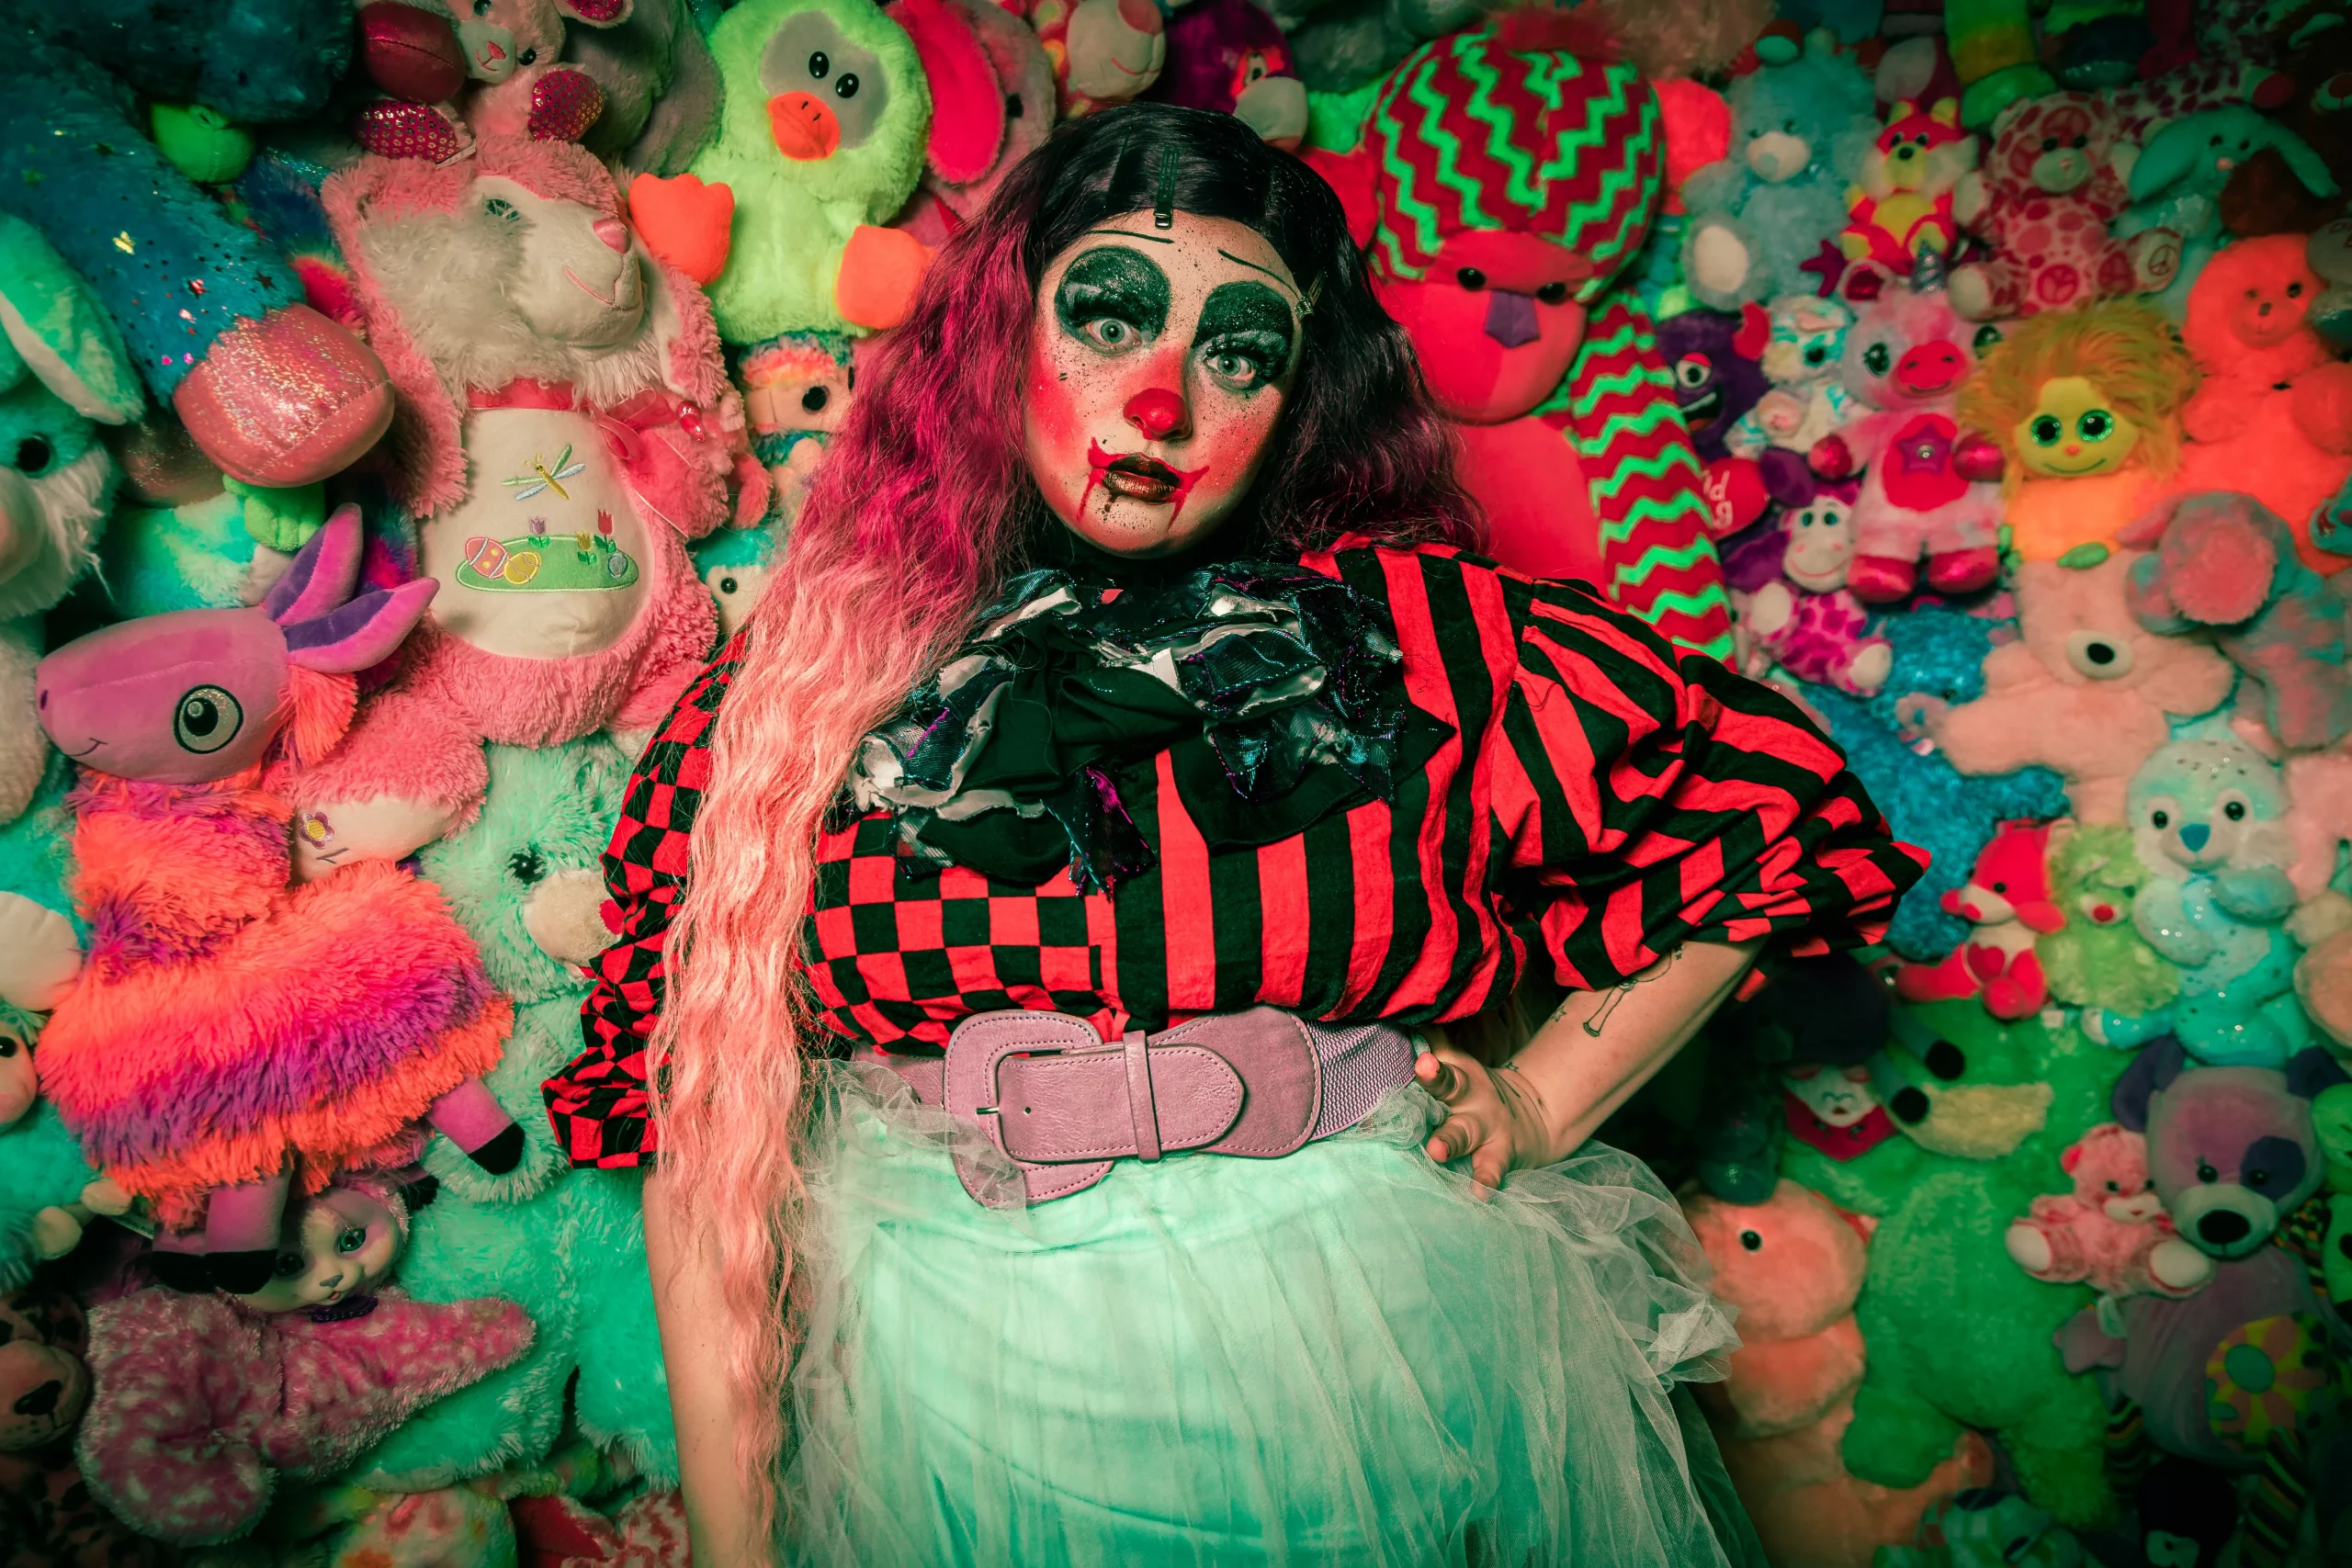 Shortcake the Clown stares at the camera in front of a wall of stuffed animals.